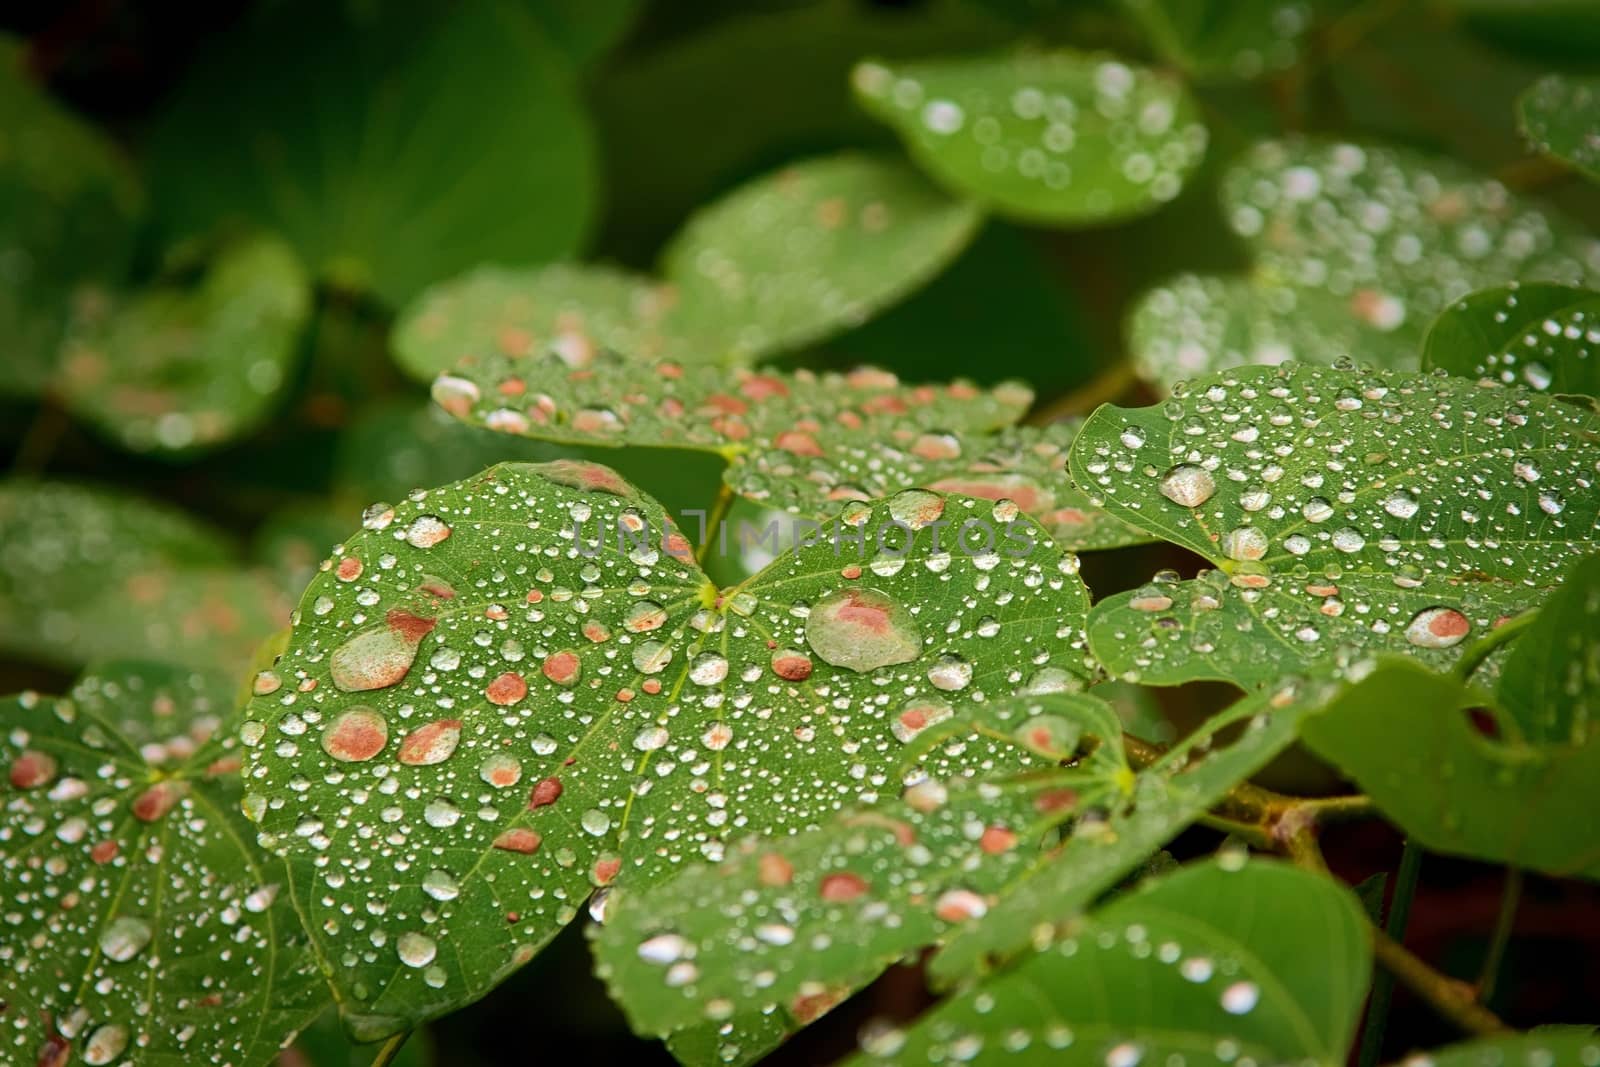 Glistening droplets over green leaves after a brief summer rain.